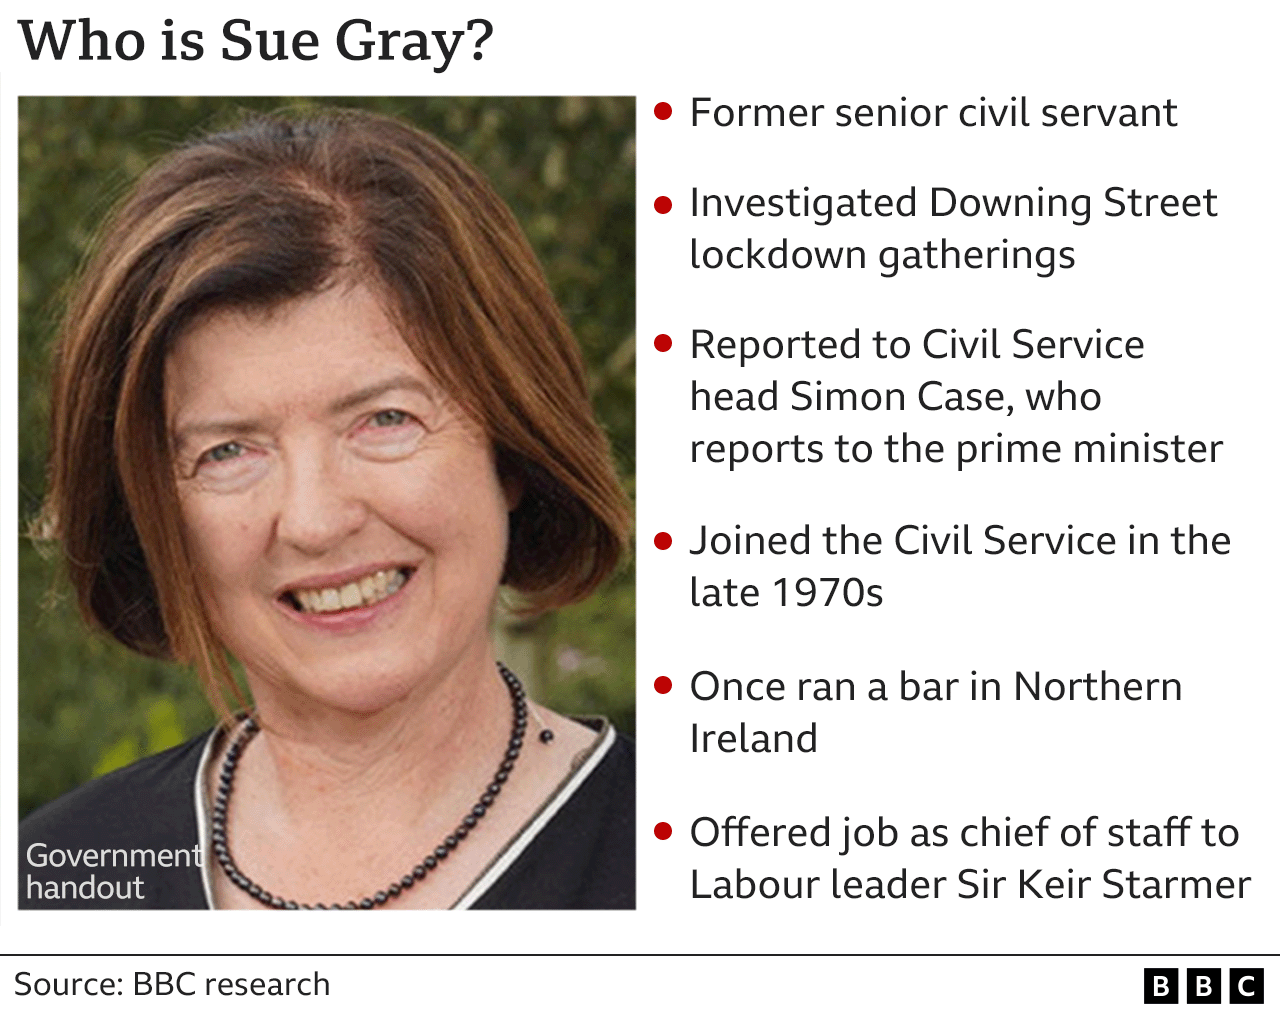 Graphic showing key points about Sue Gray